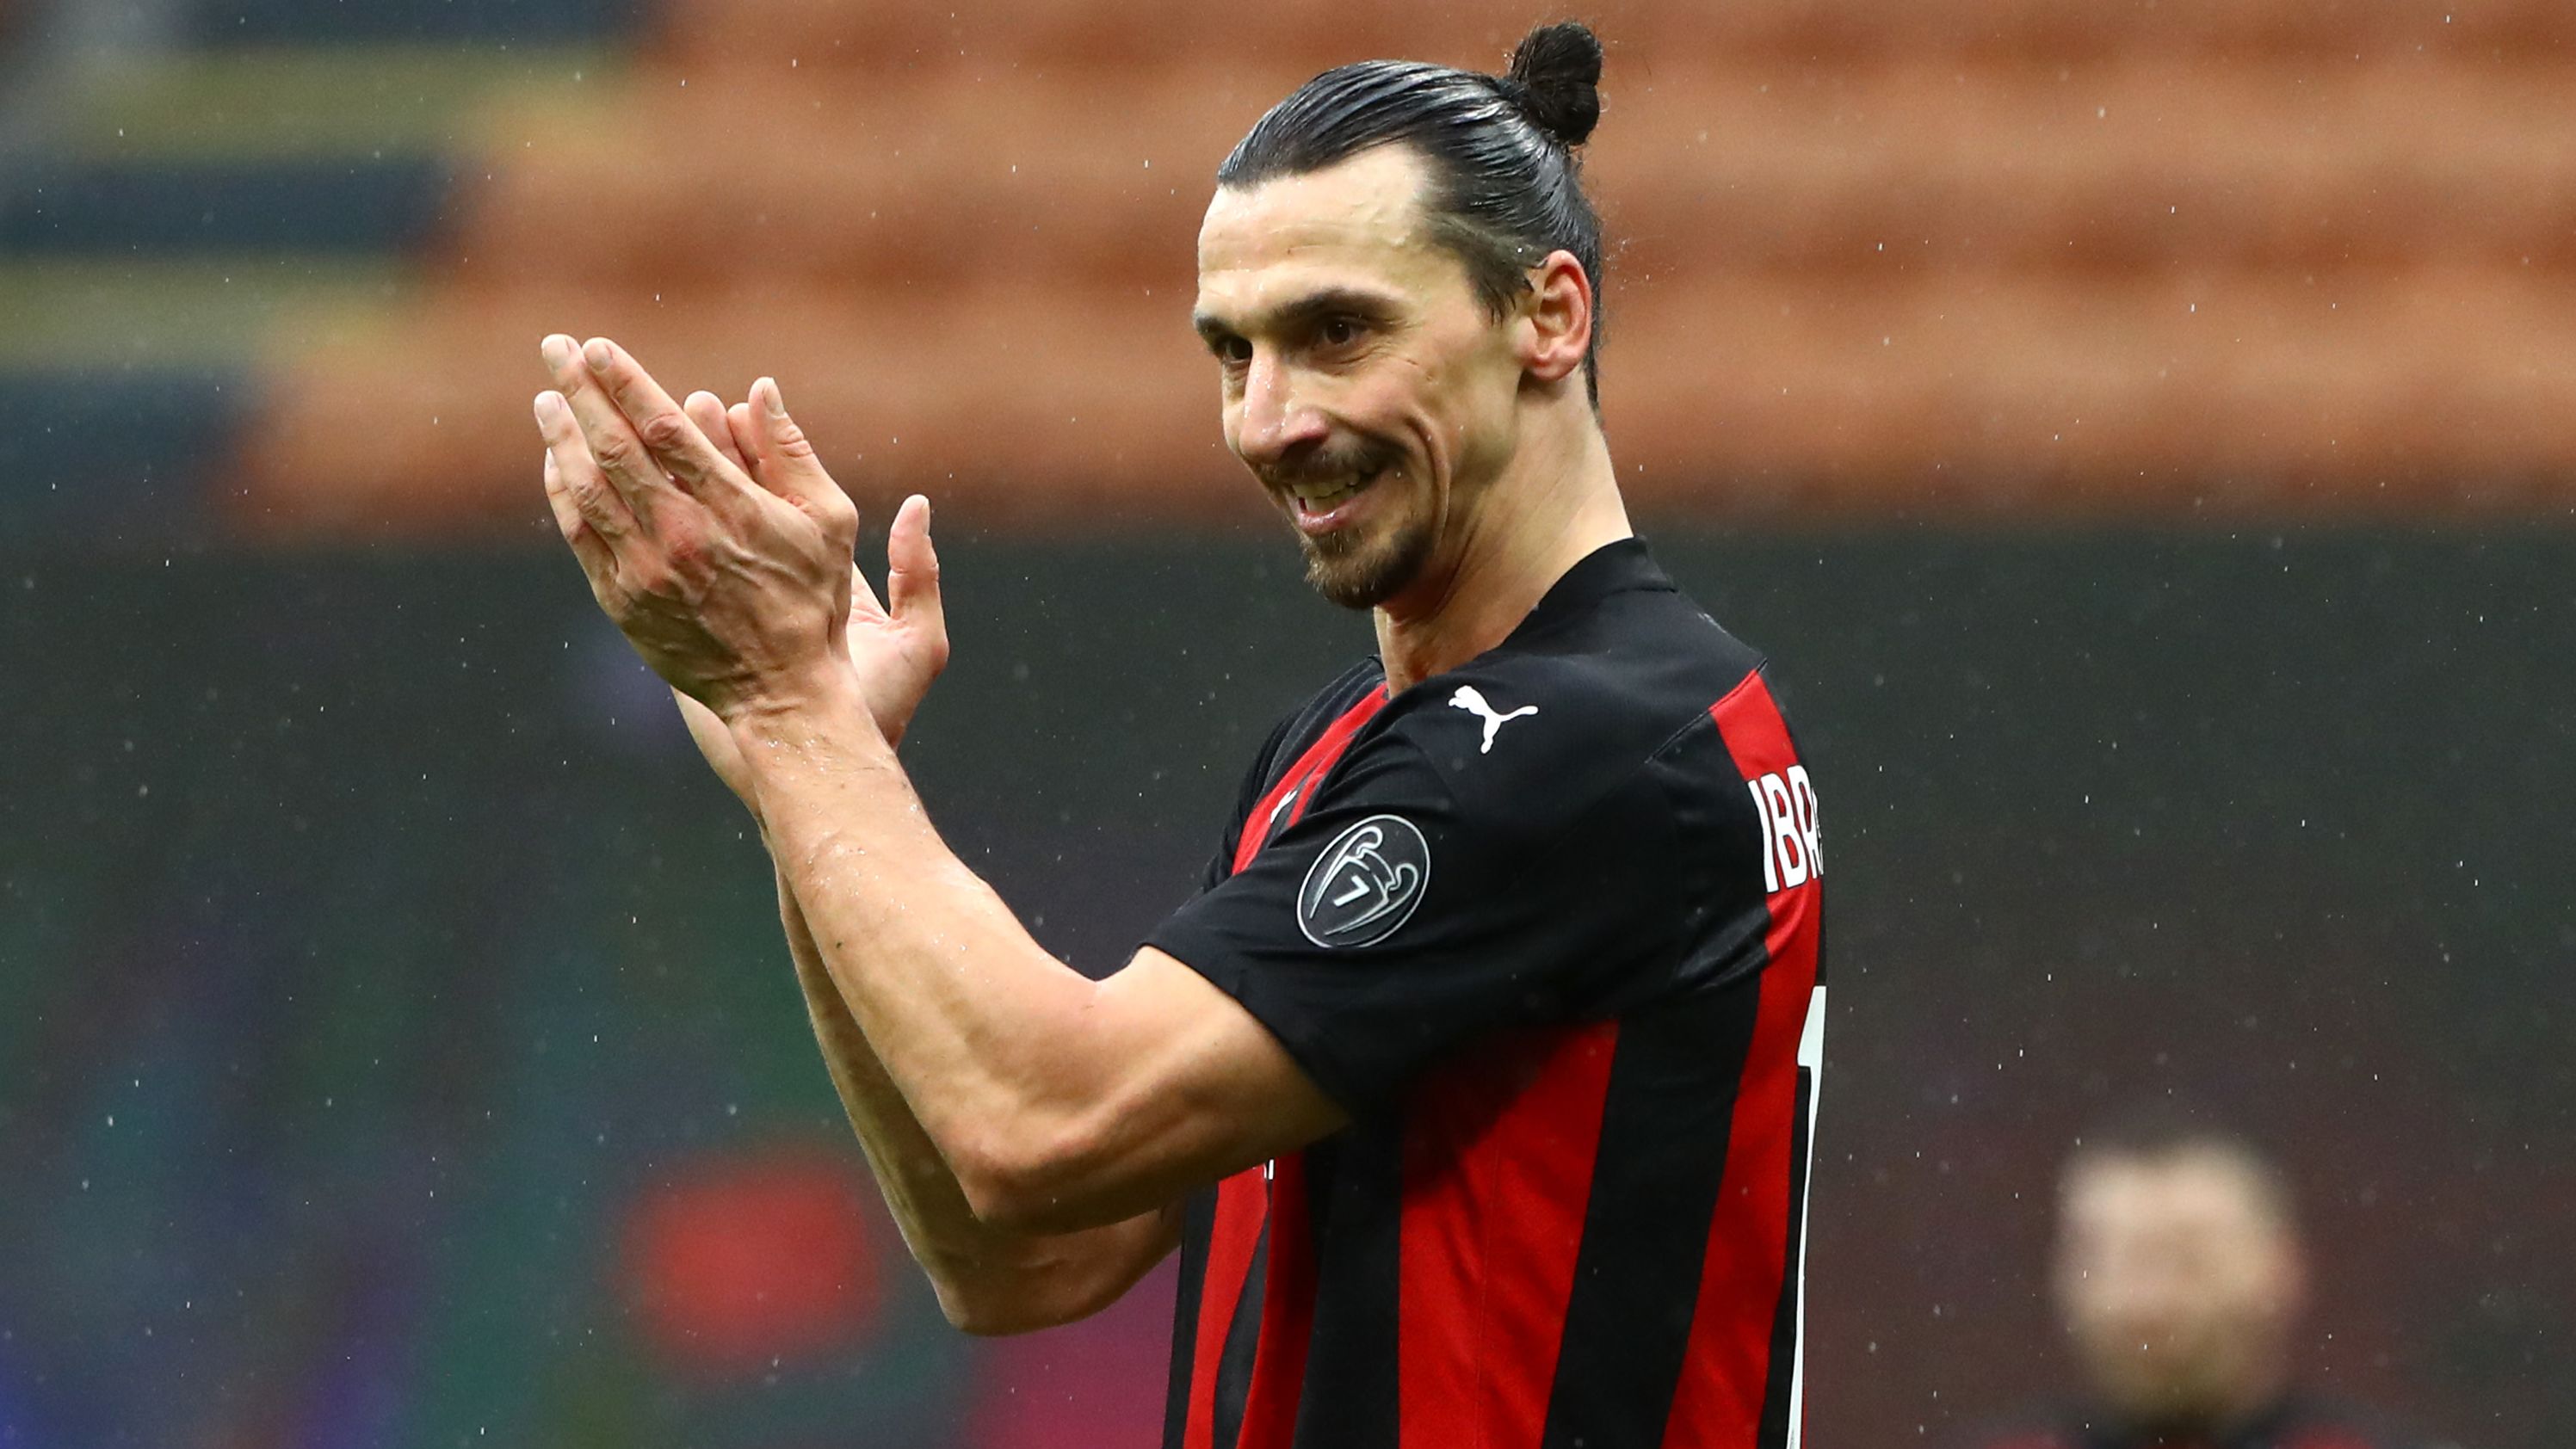 Zlatan Ibrahimovic has guided AC Milan to the top of the Serie A standings.